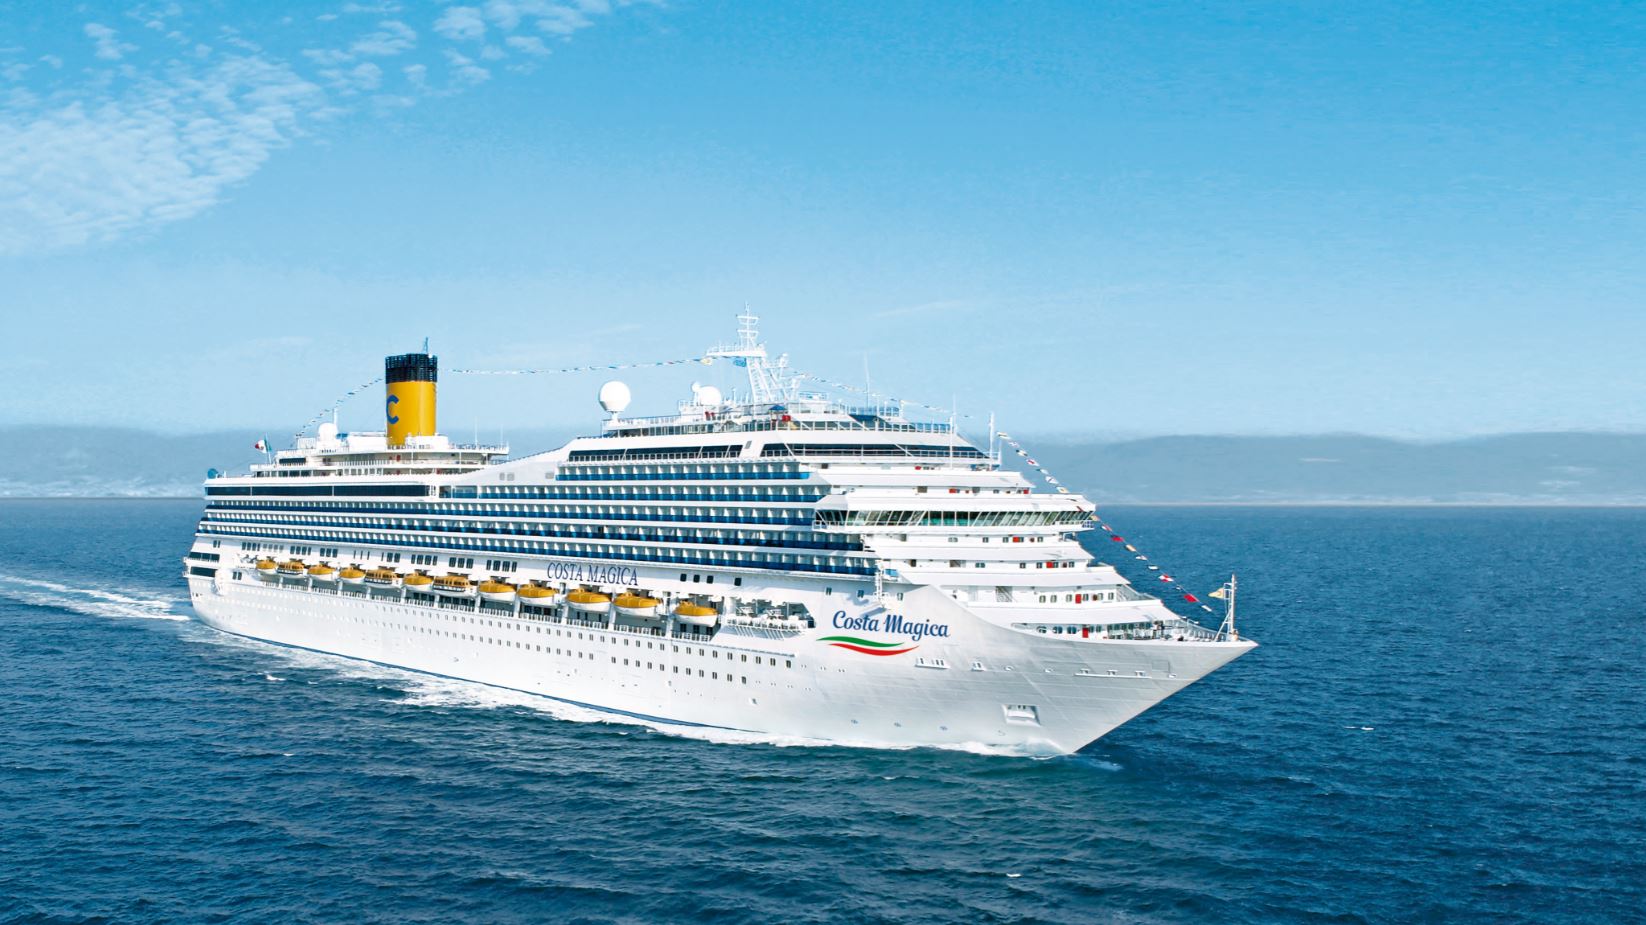 A new ship and voyages to the Amazon the highlights of Costa Cruises